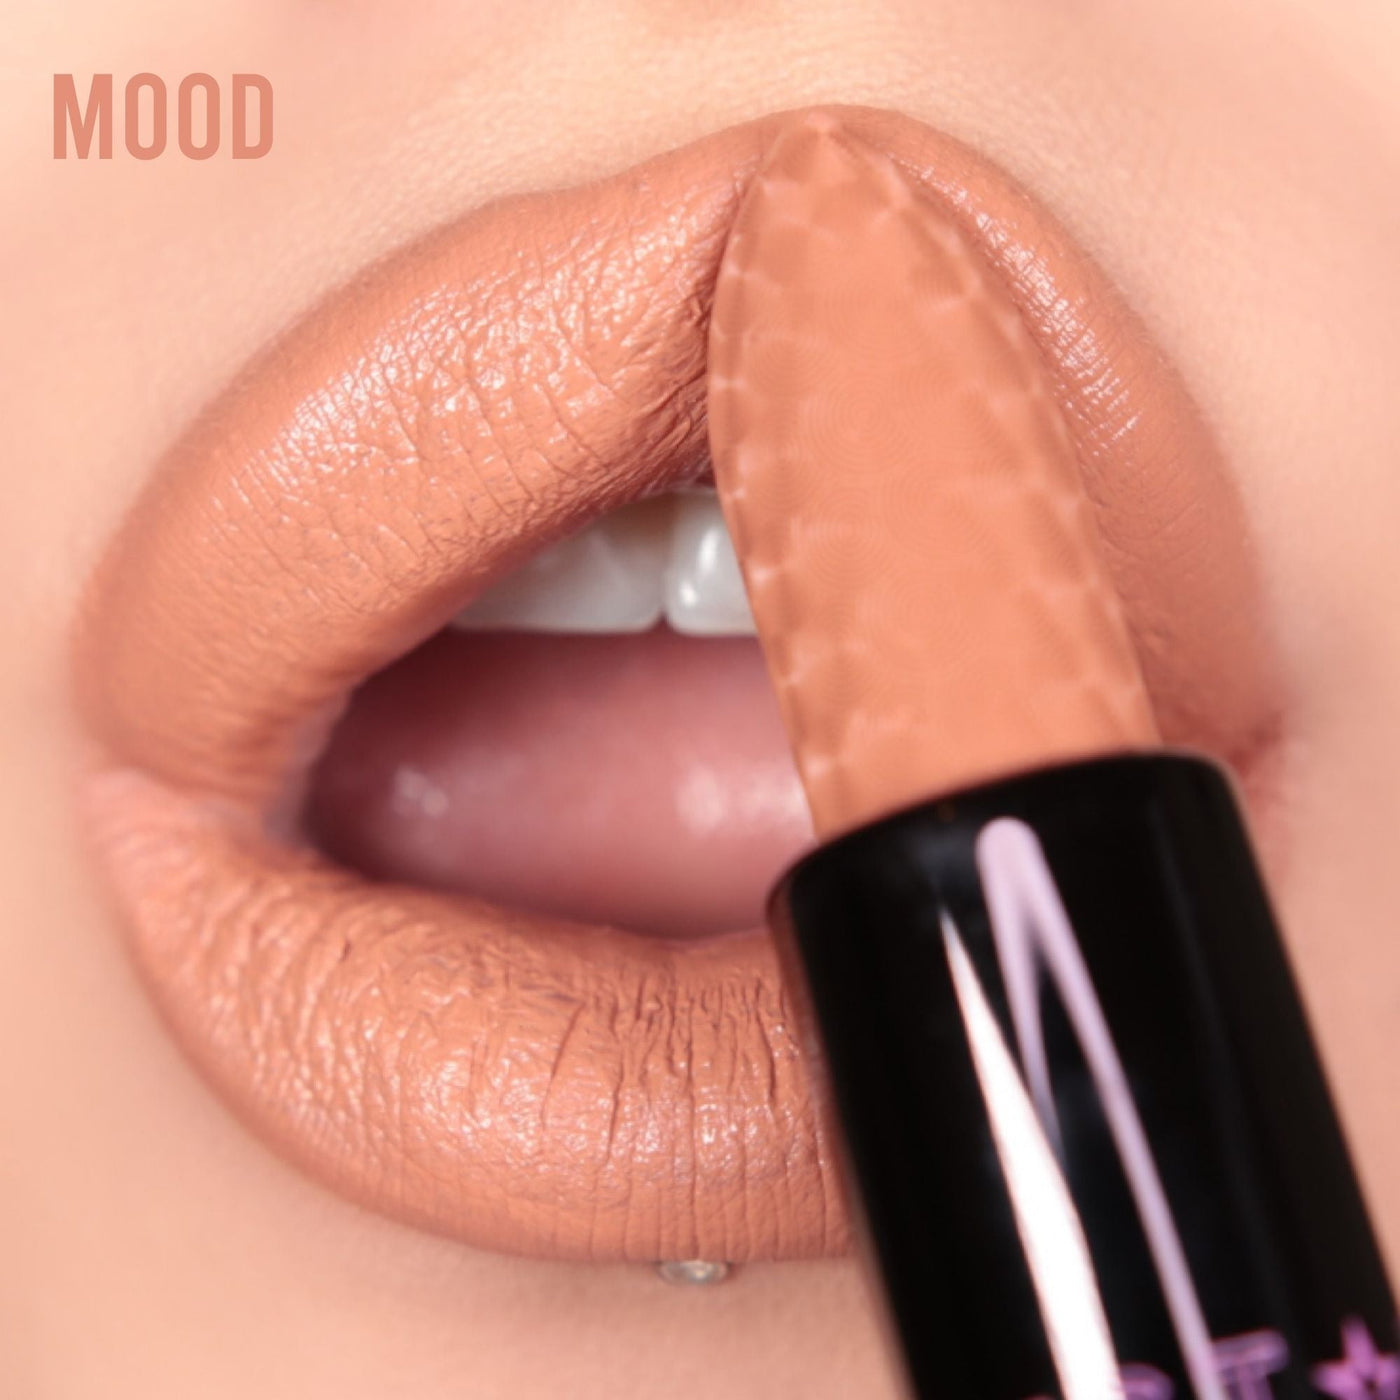 Poutstar Soft Satin Lipstick - The Collection